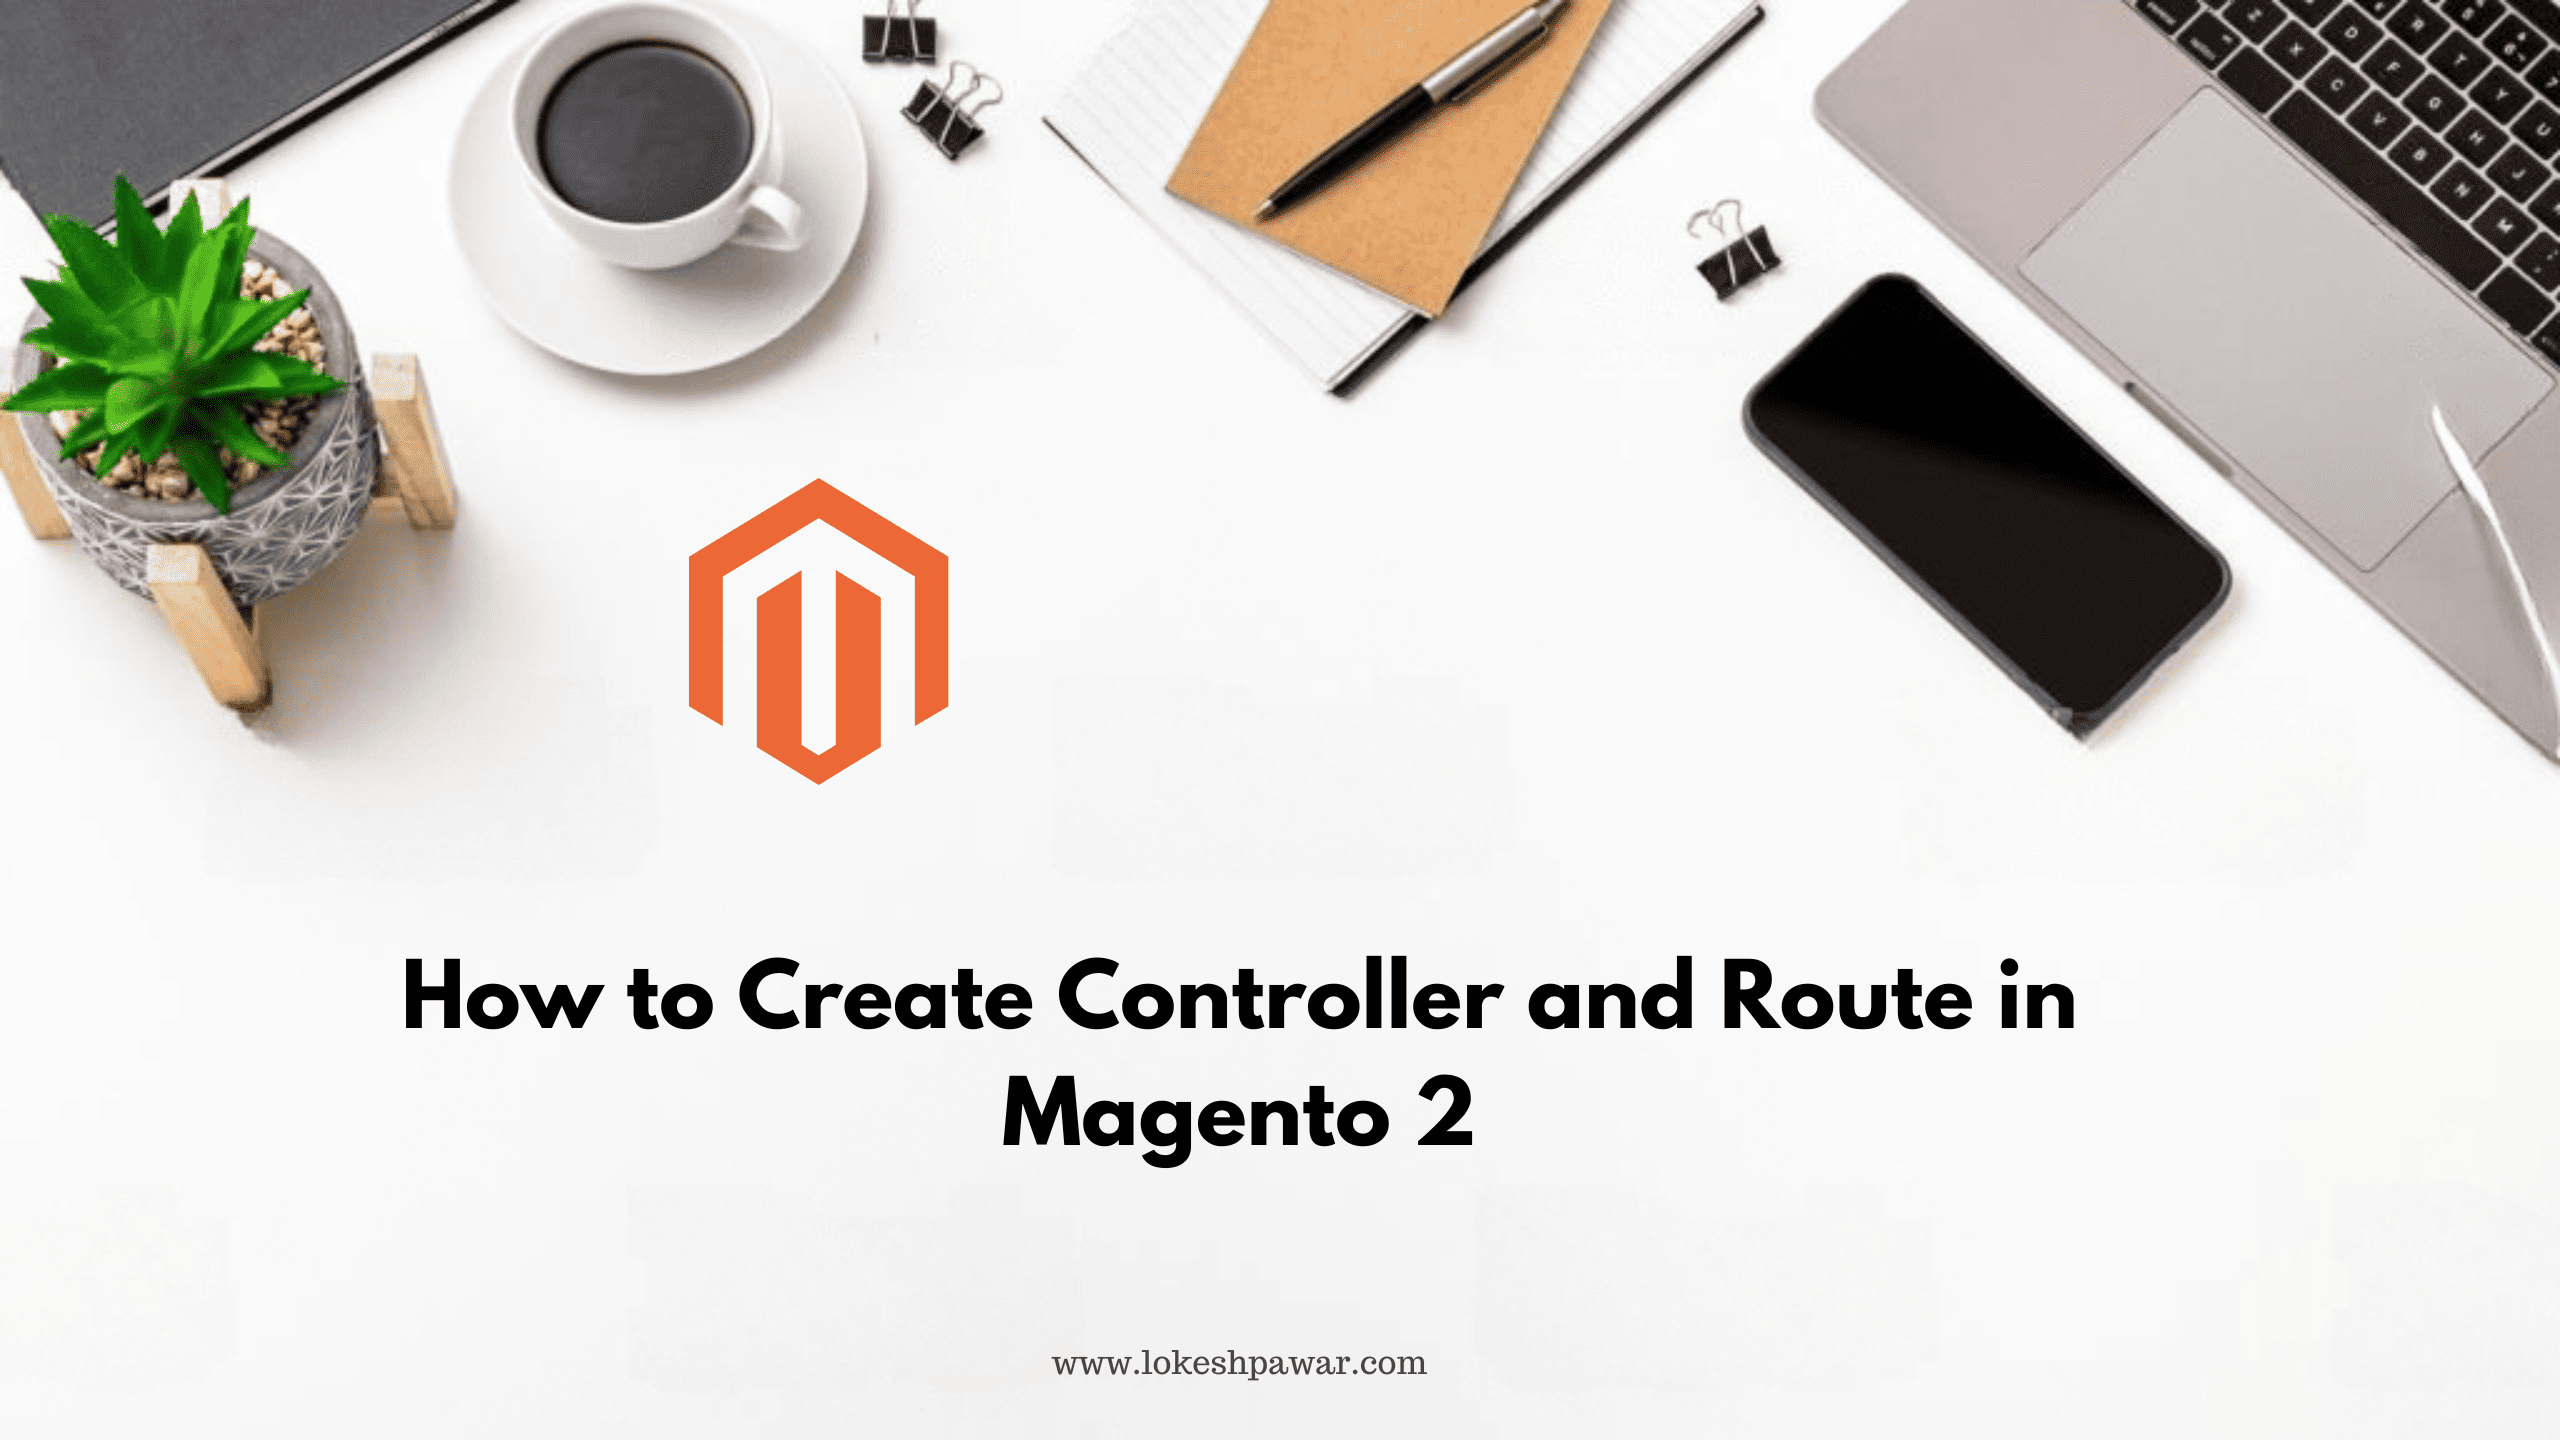 How to Create Controller and Route in Magento 2 - Lokesh Pawar